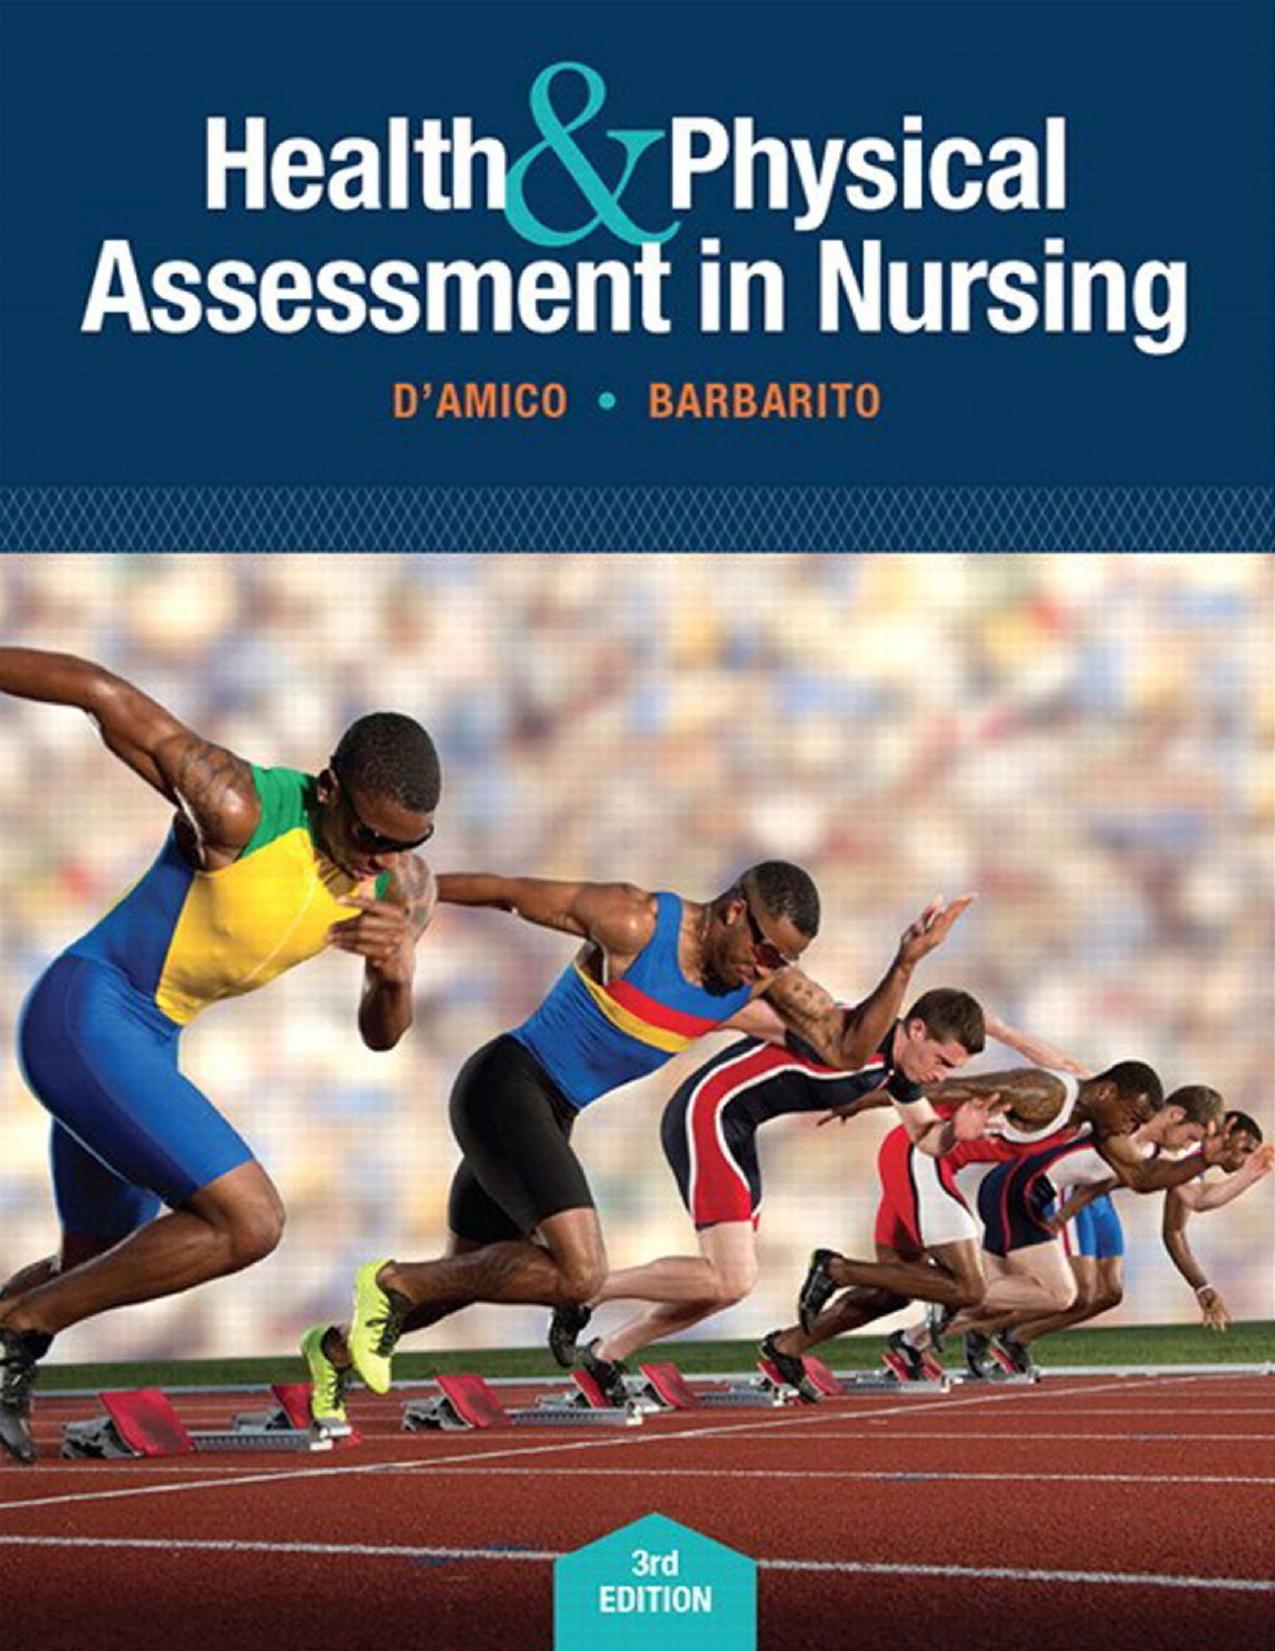 Clinical Pocket Guide for Health & Physical Assessment in Nursing 3rd Edition by Damico , Barbarito